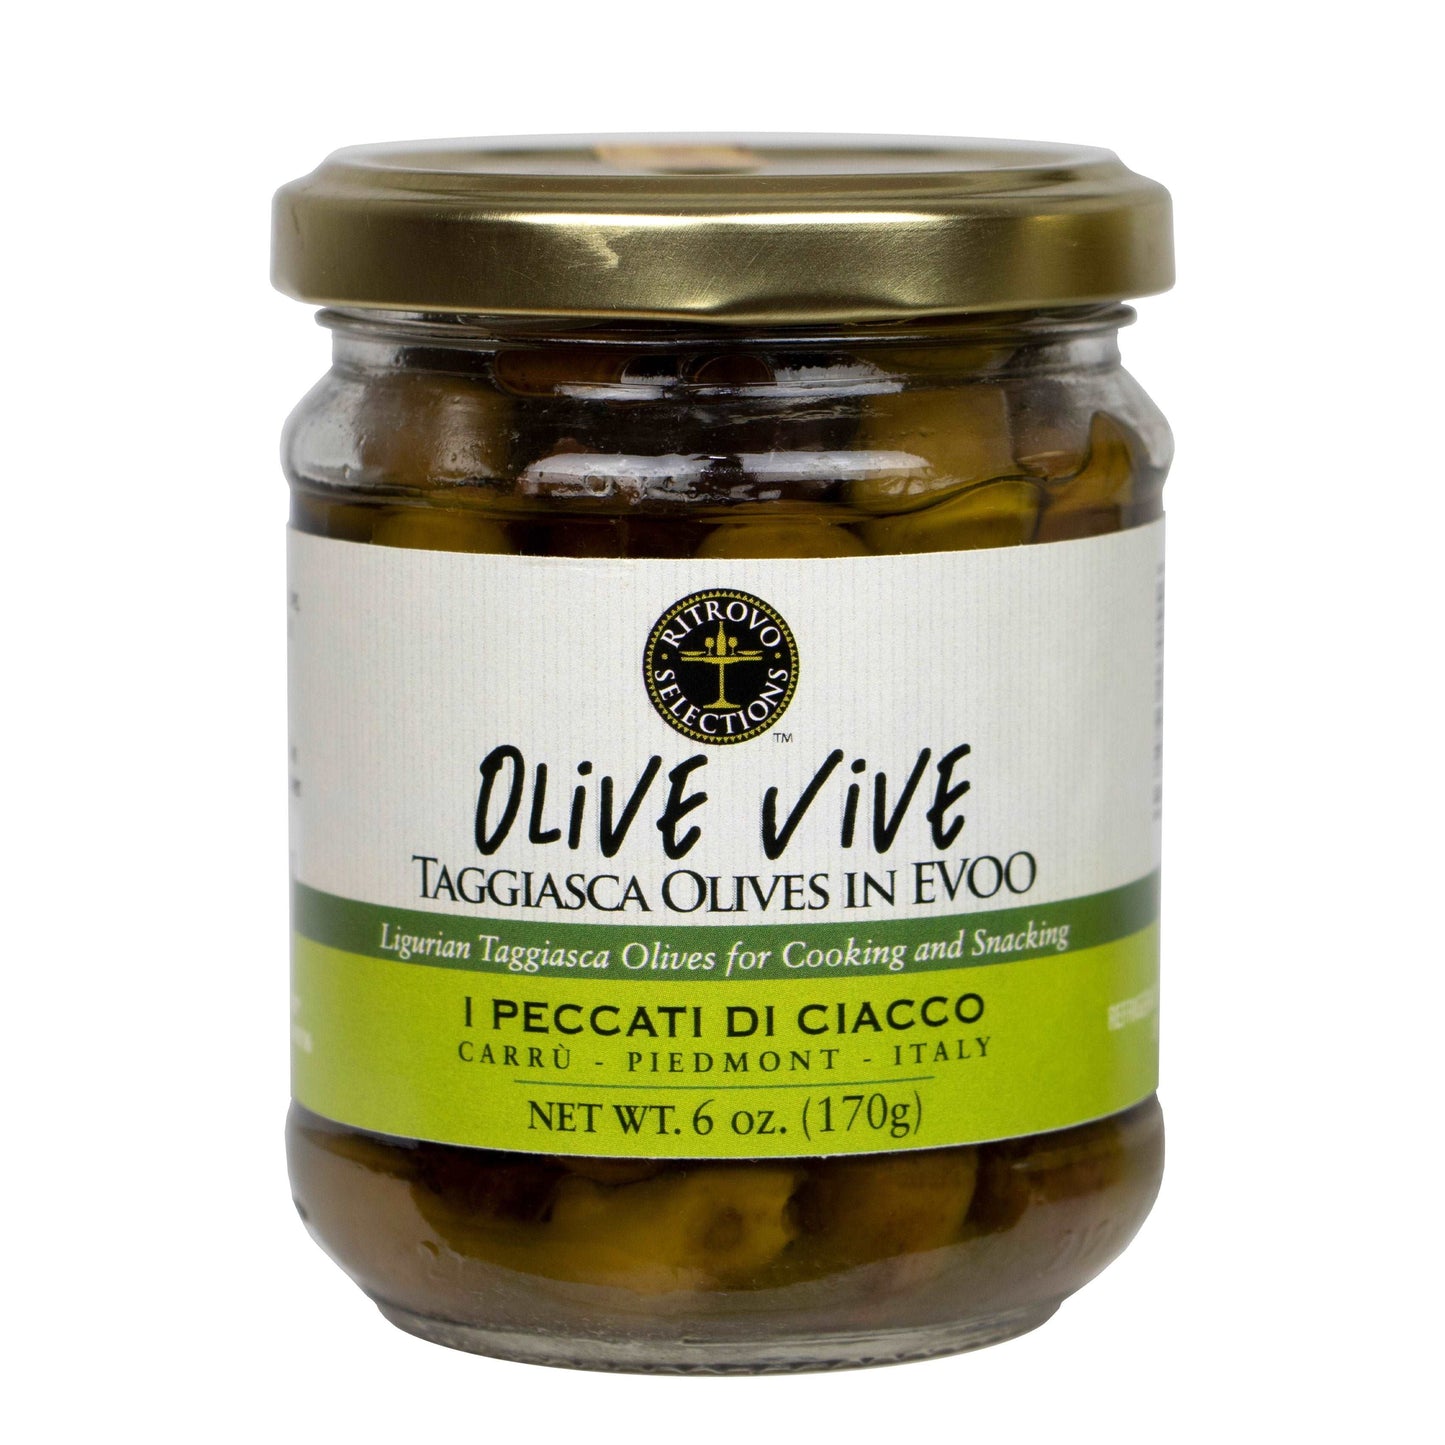 Ciacco Olive Vive, 100% Taggiasca Olives